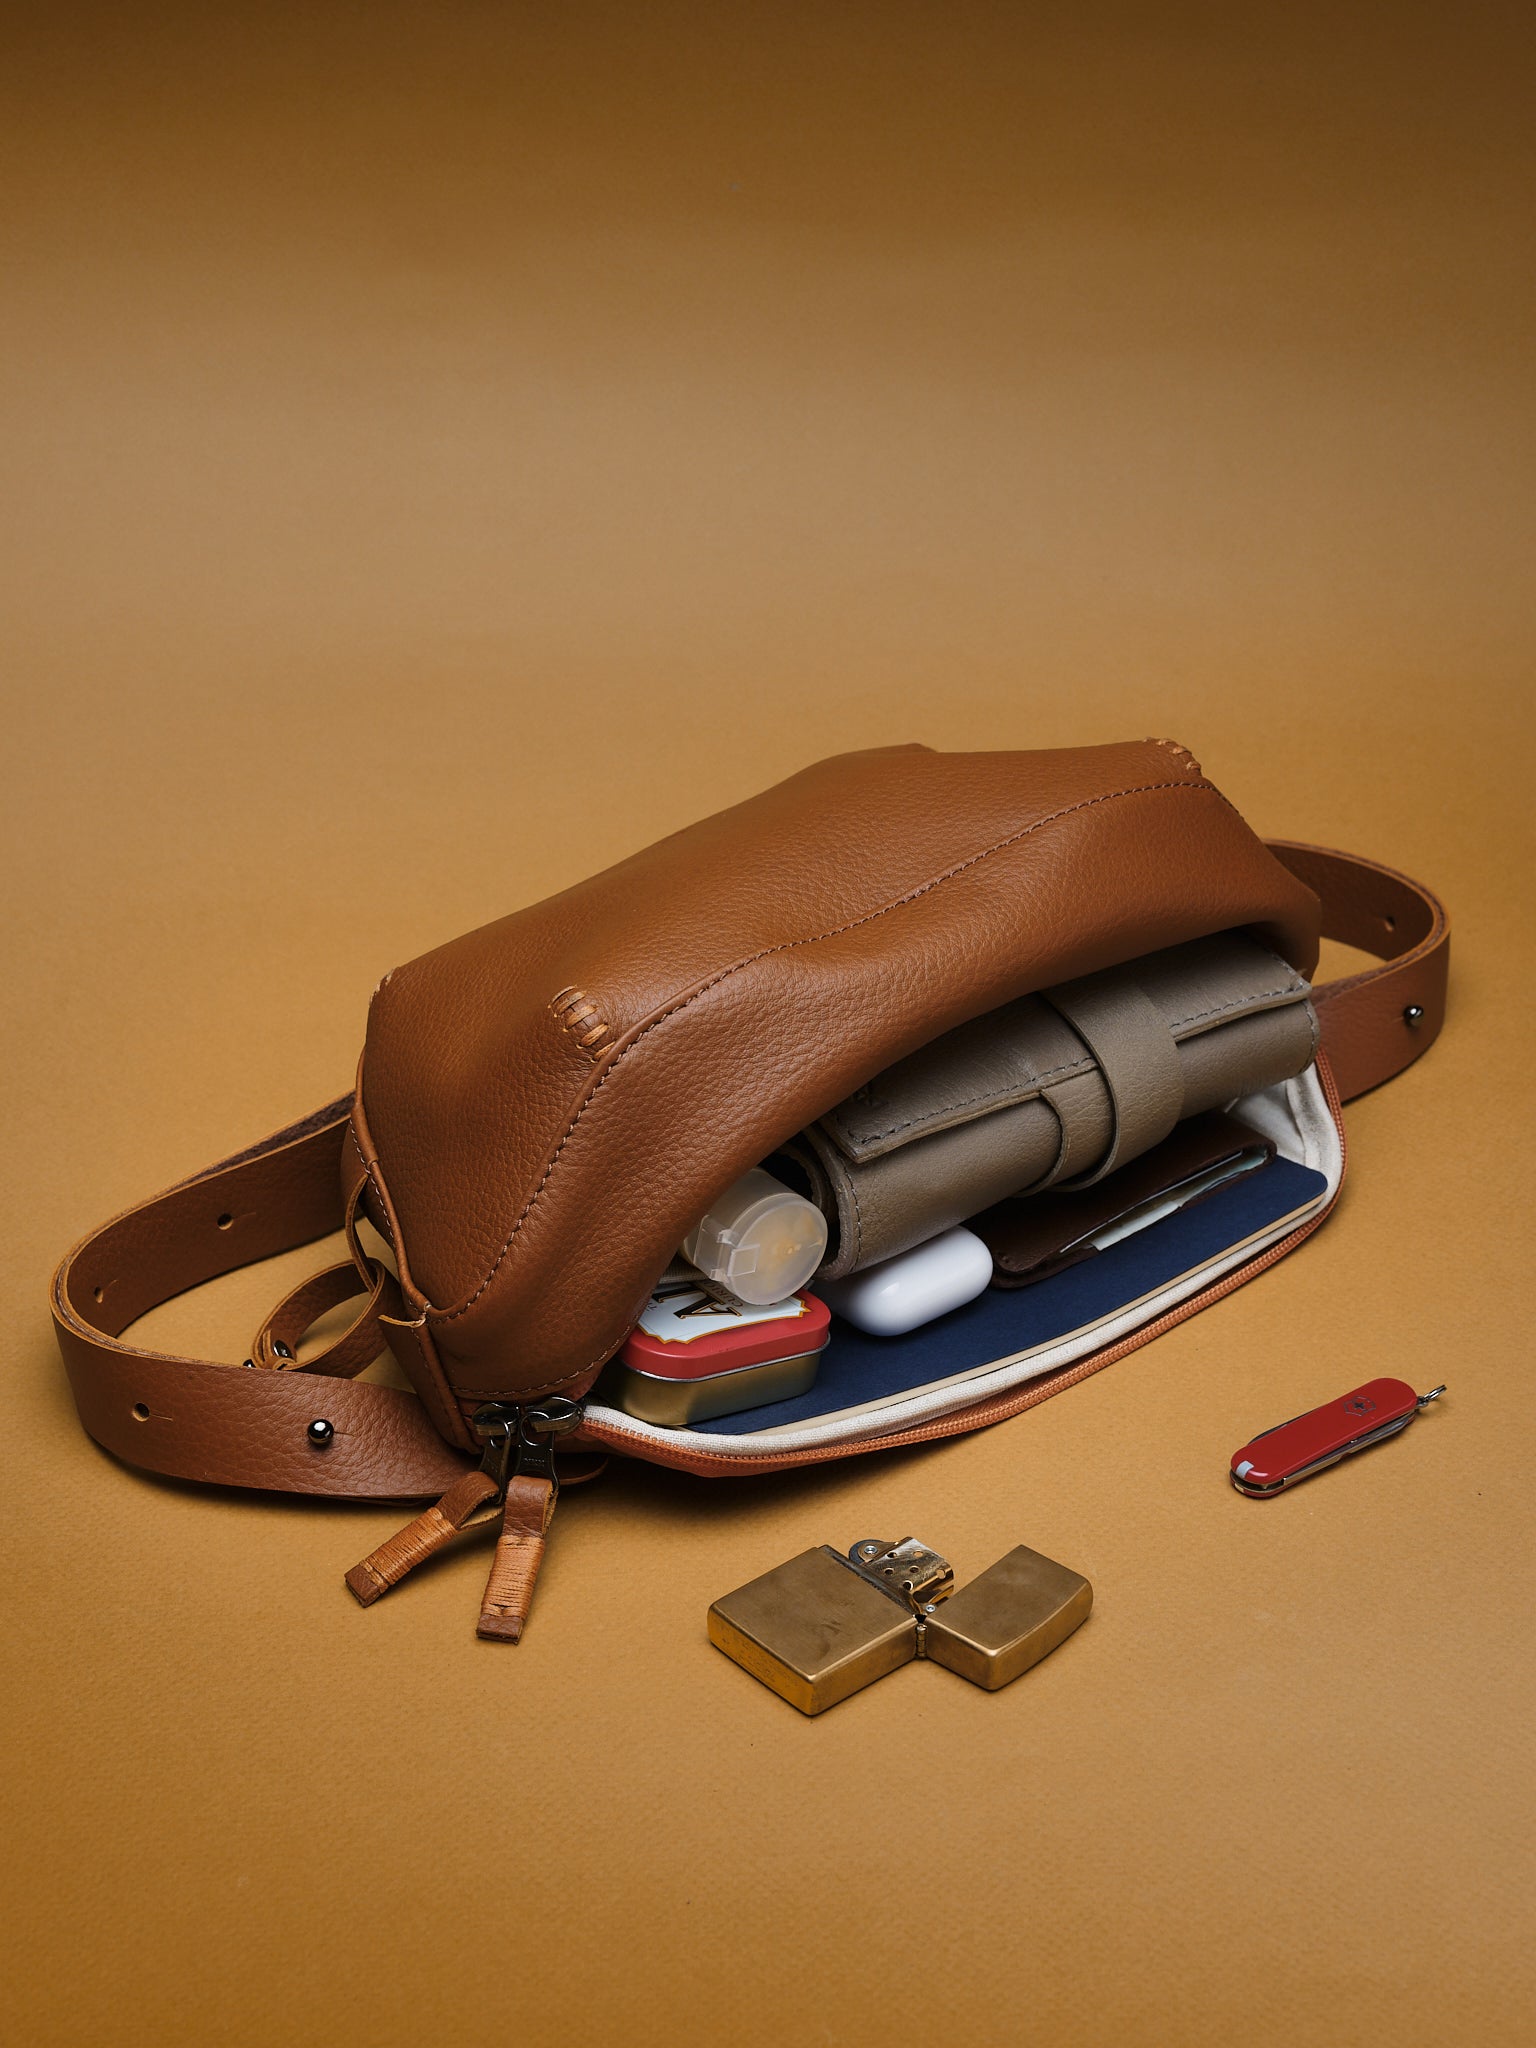 Divider pockets for small essentials. Fanny Pack Crossbody. Mens Sling Bag Tan by Capra Leather